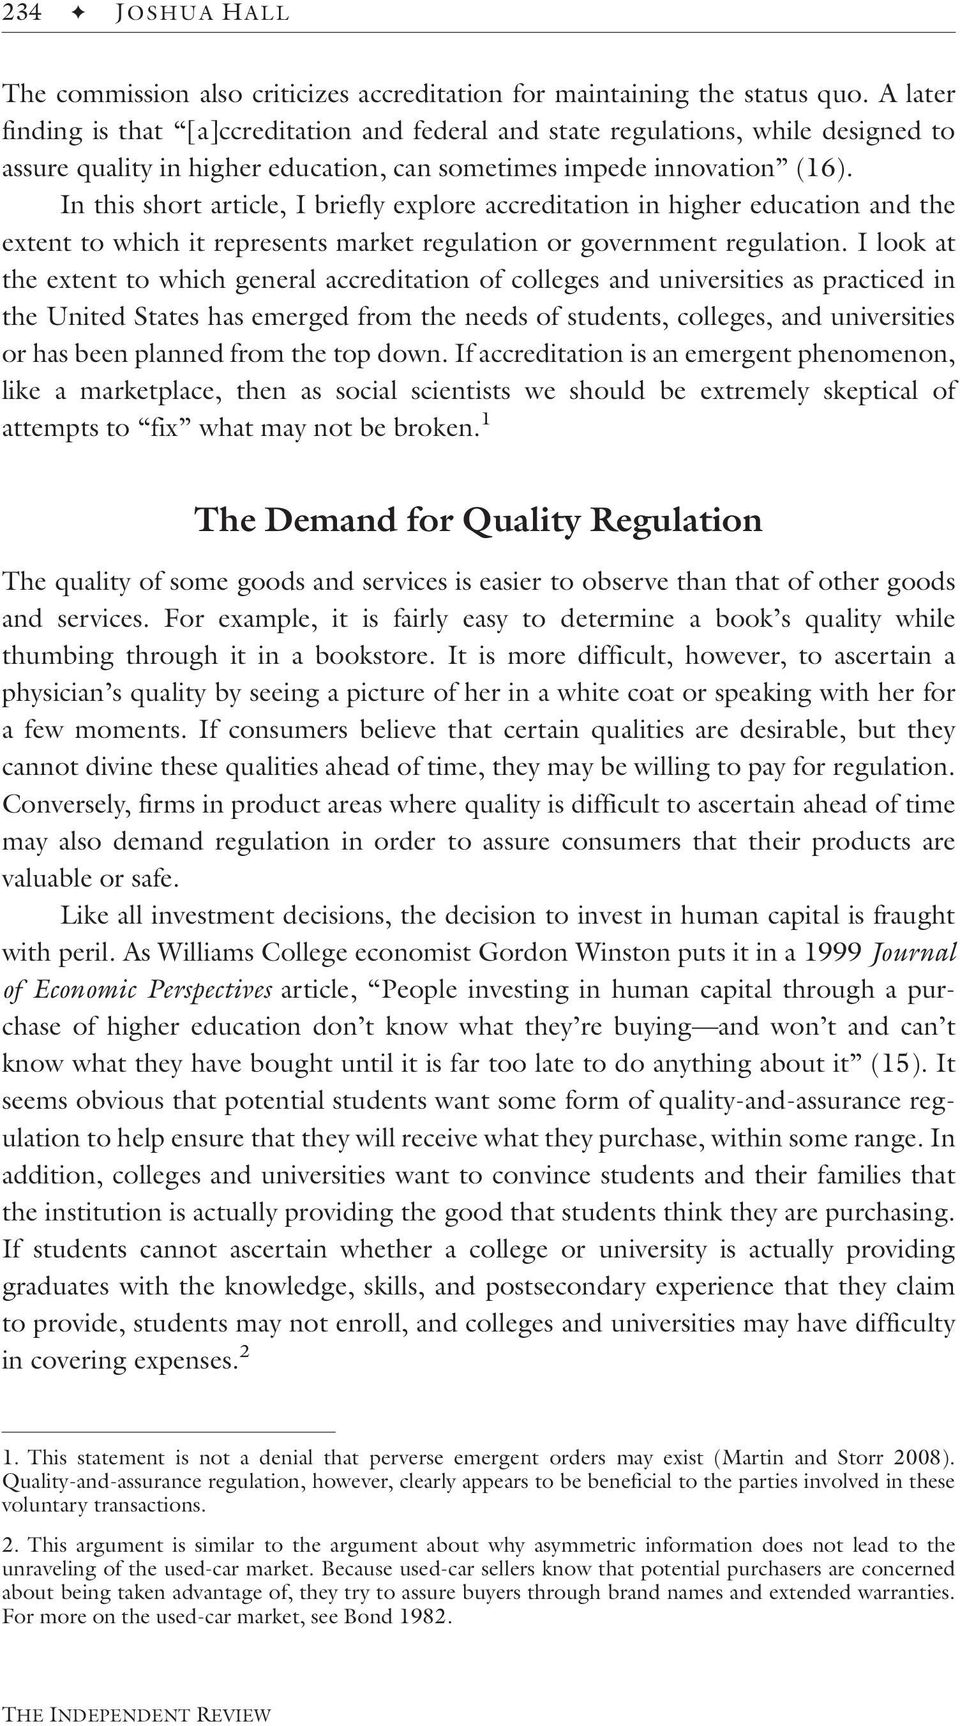 In this short article, I briefly explore accreditation in higher education and the extent to which it represents market regulation or government regulation.